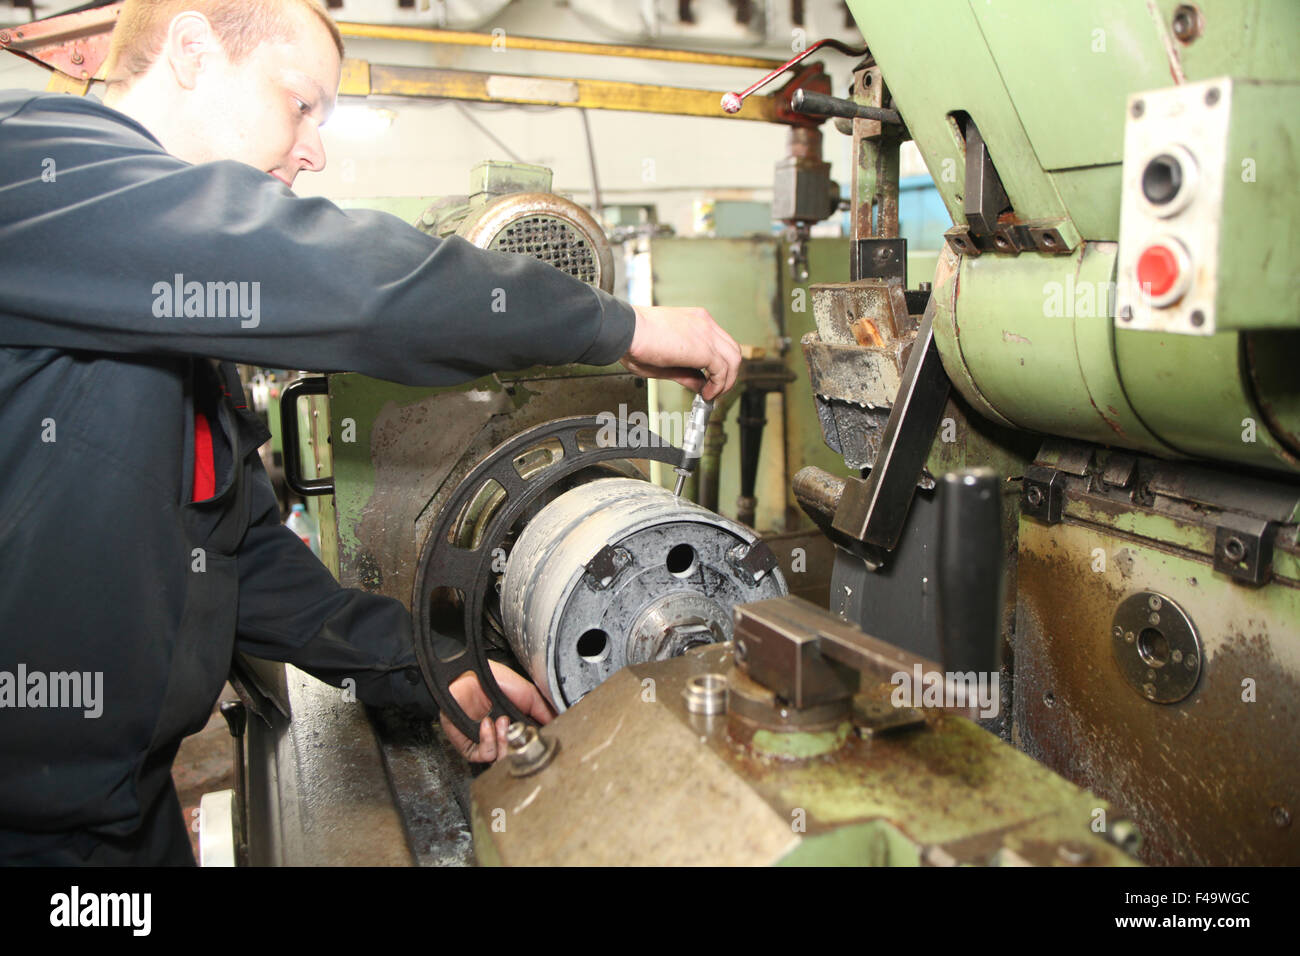 Young worker operates metal detail processing at turning lathe Stock Photo